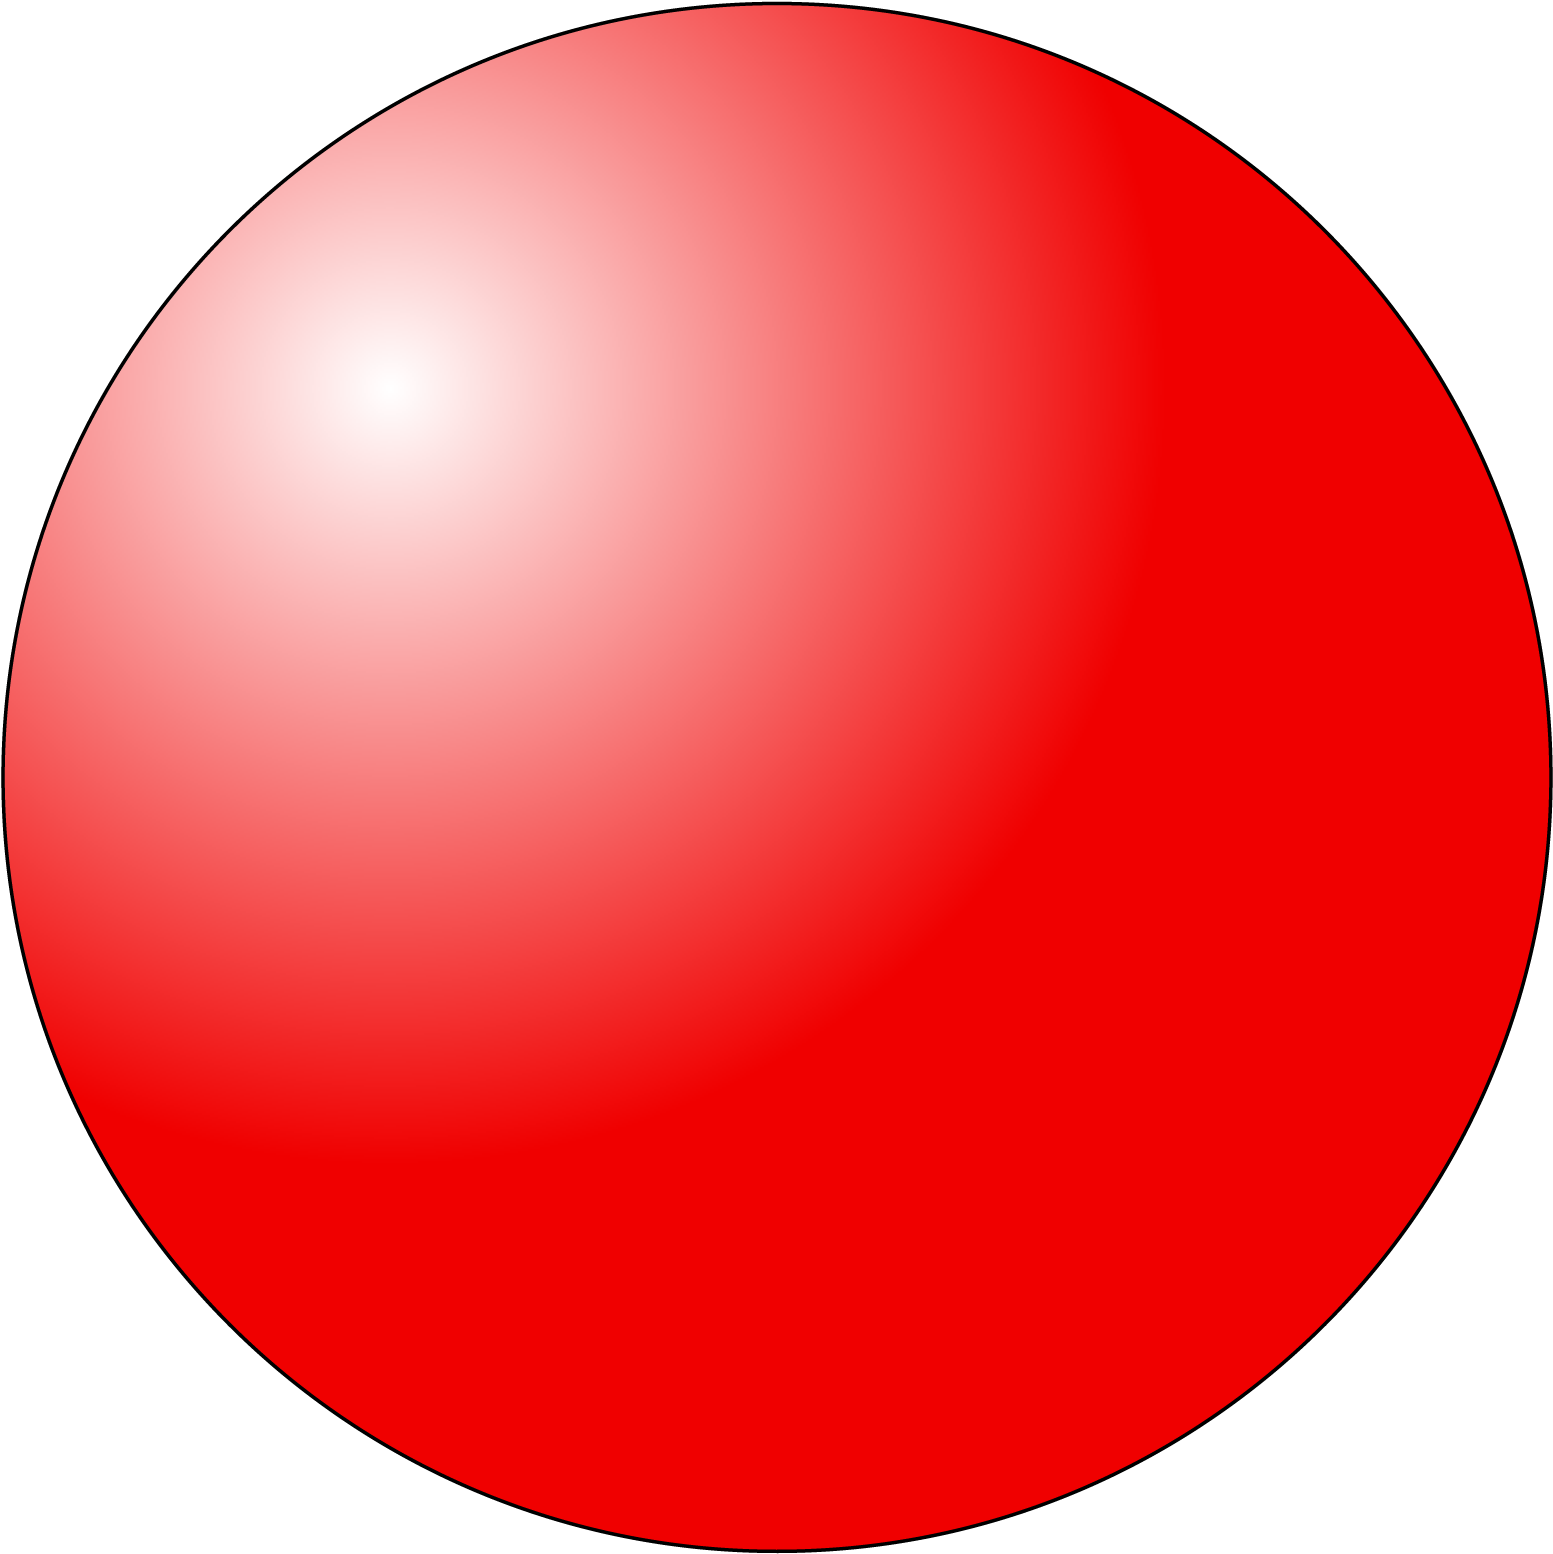 A Red Ball With Black Background